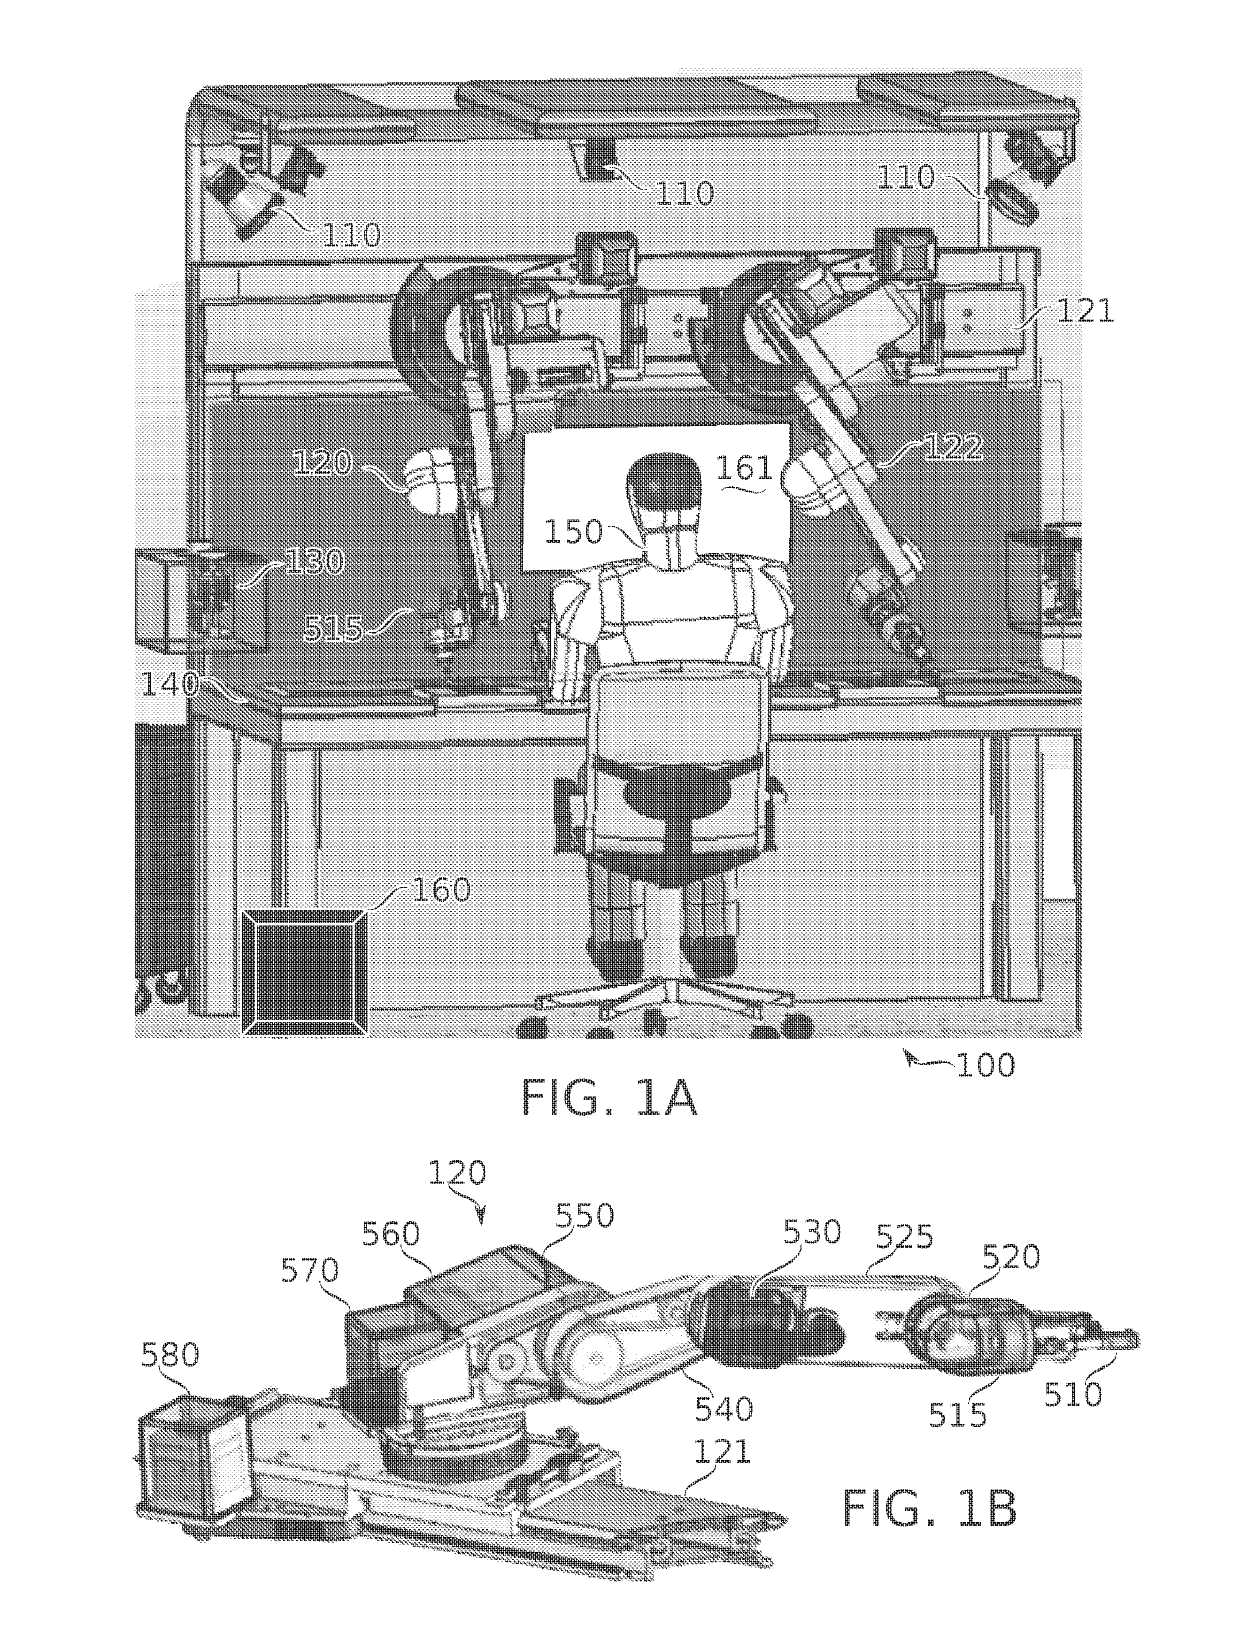 Systems and methods for human and robot collaboration